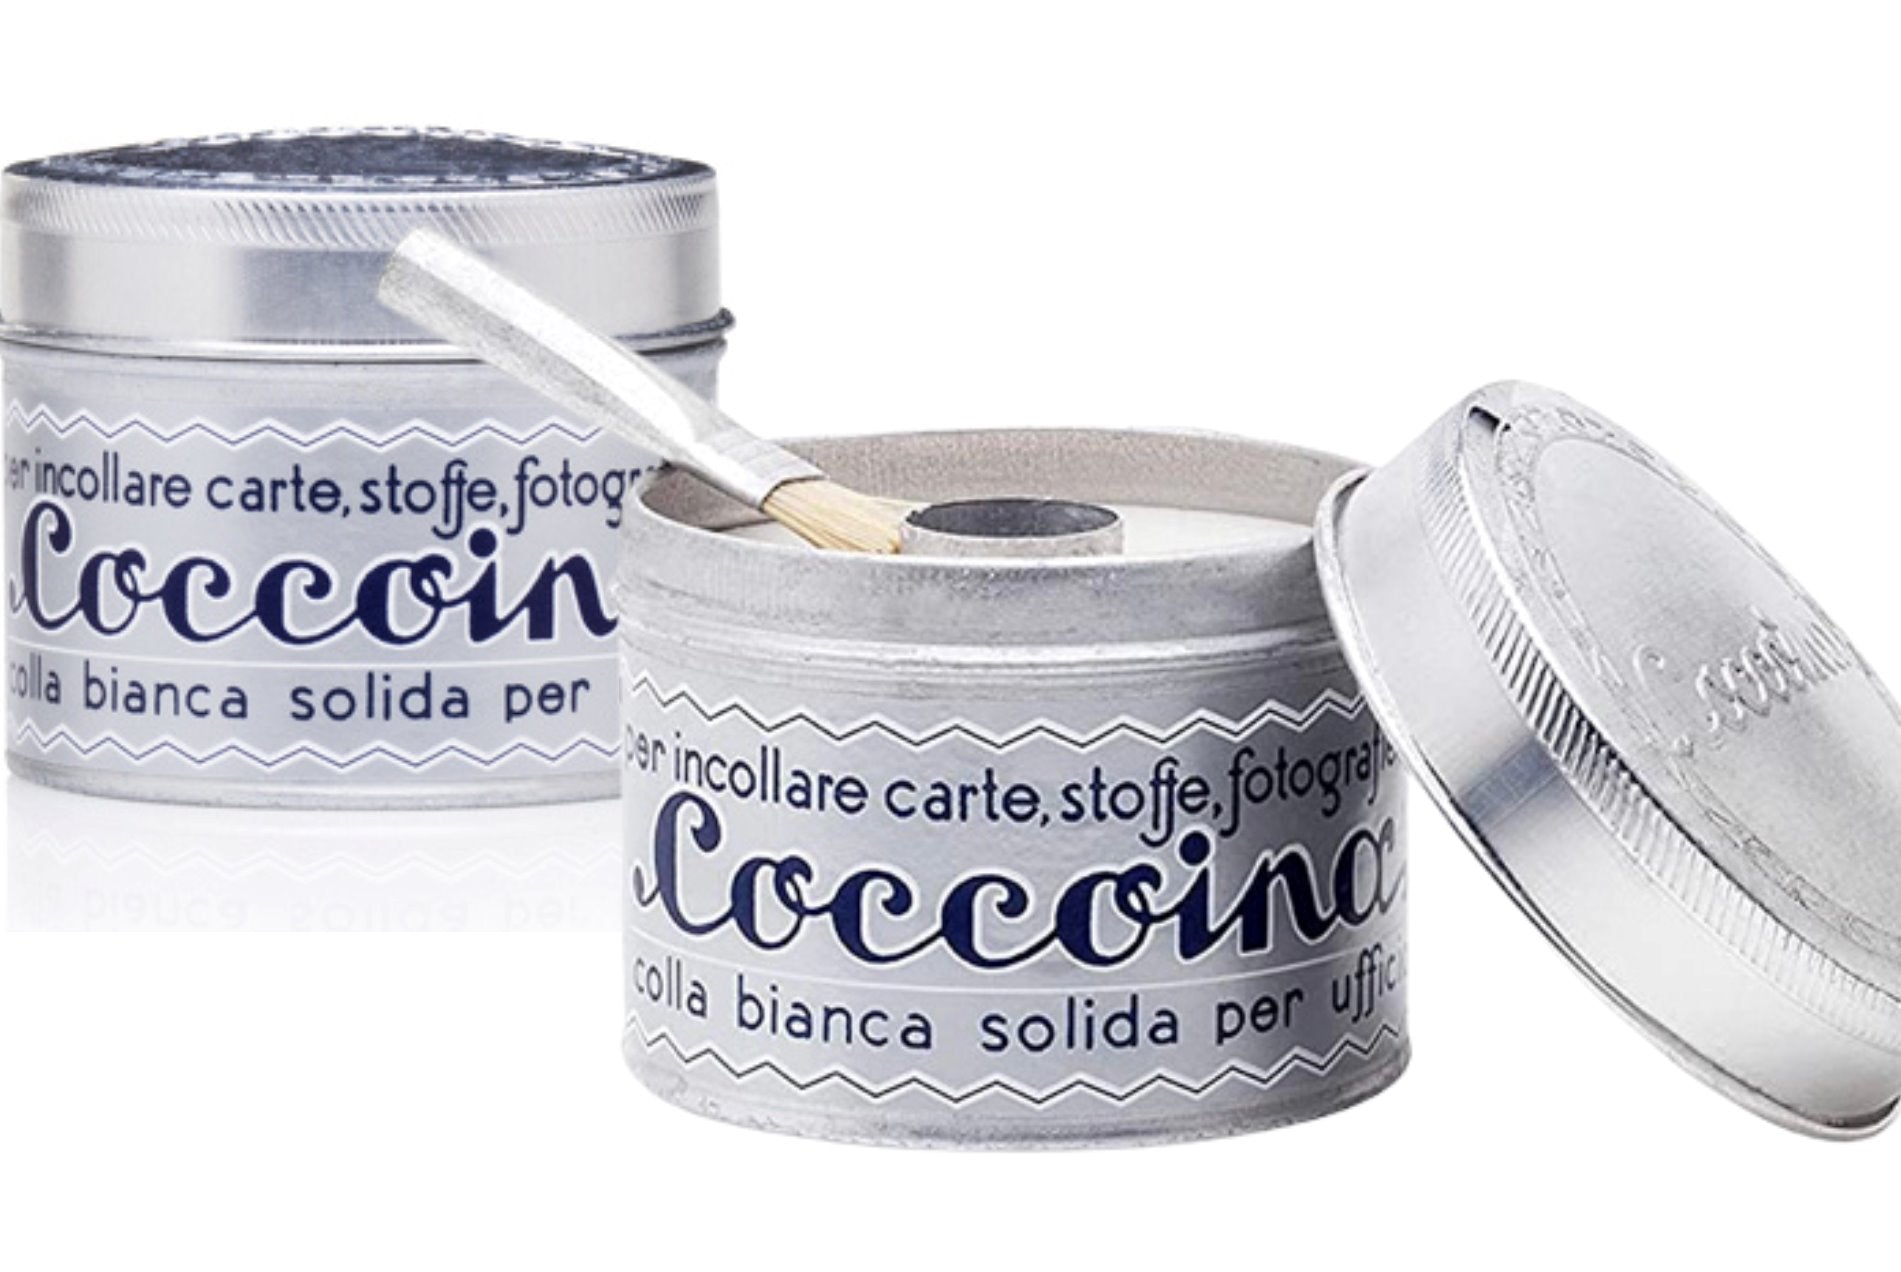 Coccoina Adhesive Paste, Water-Based, Plant-Based - Alder & Alouette 